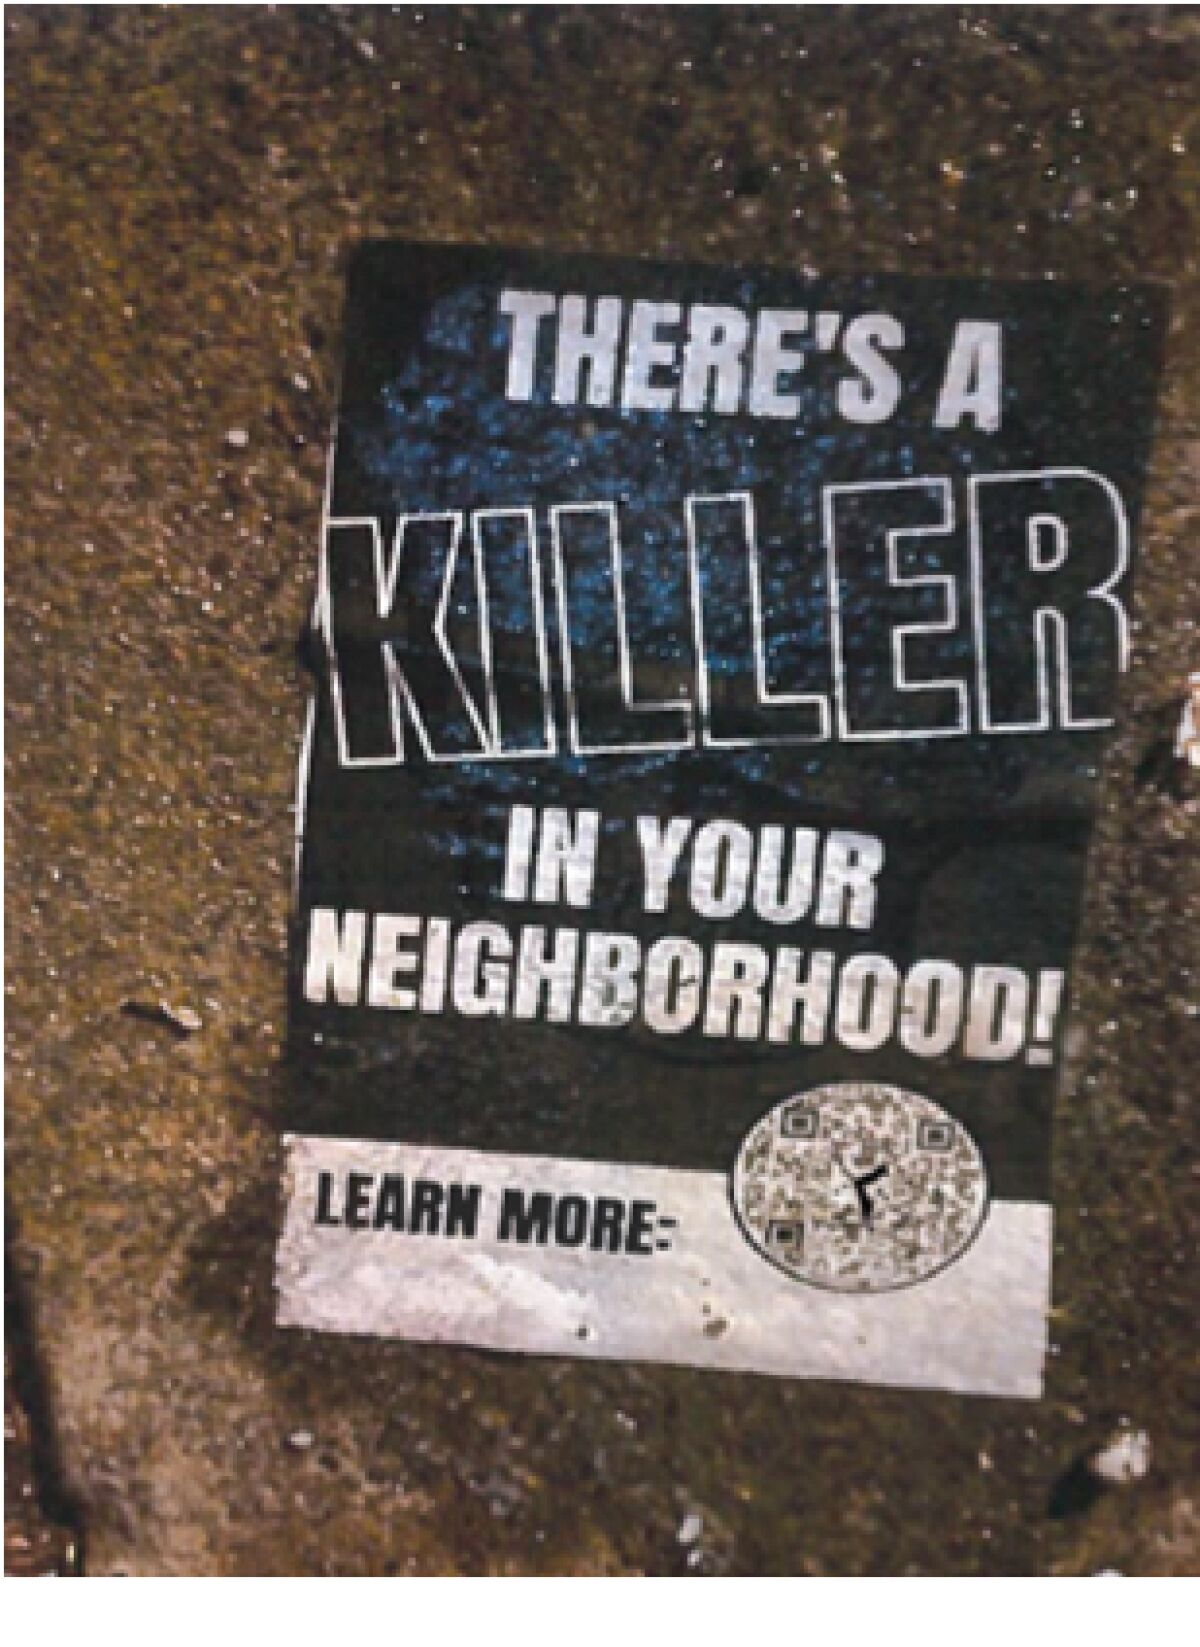 A poster says "there's a killer in your neighborhood"